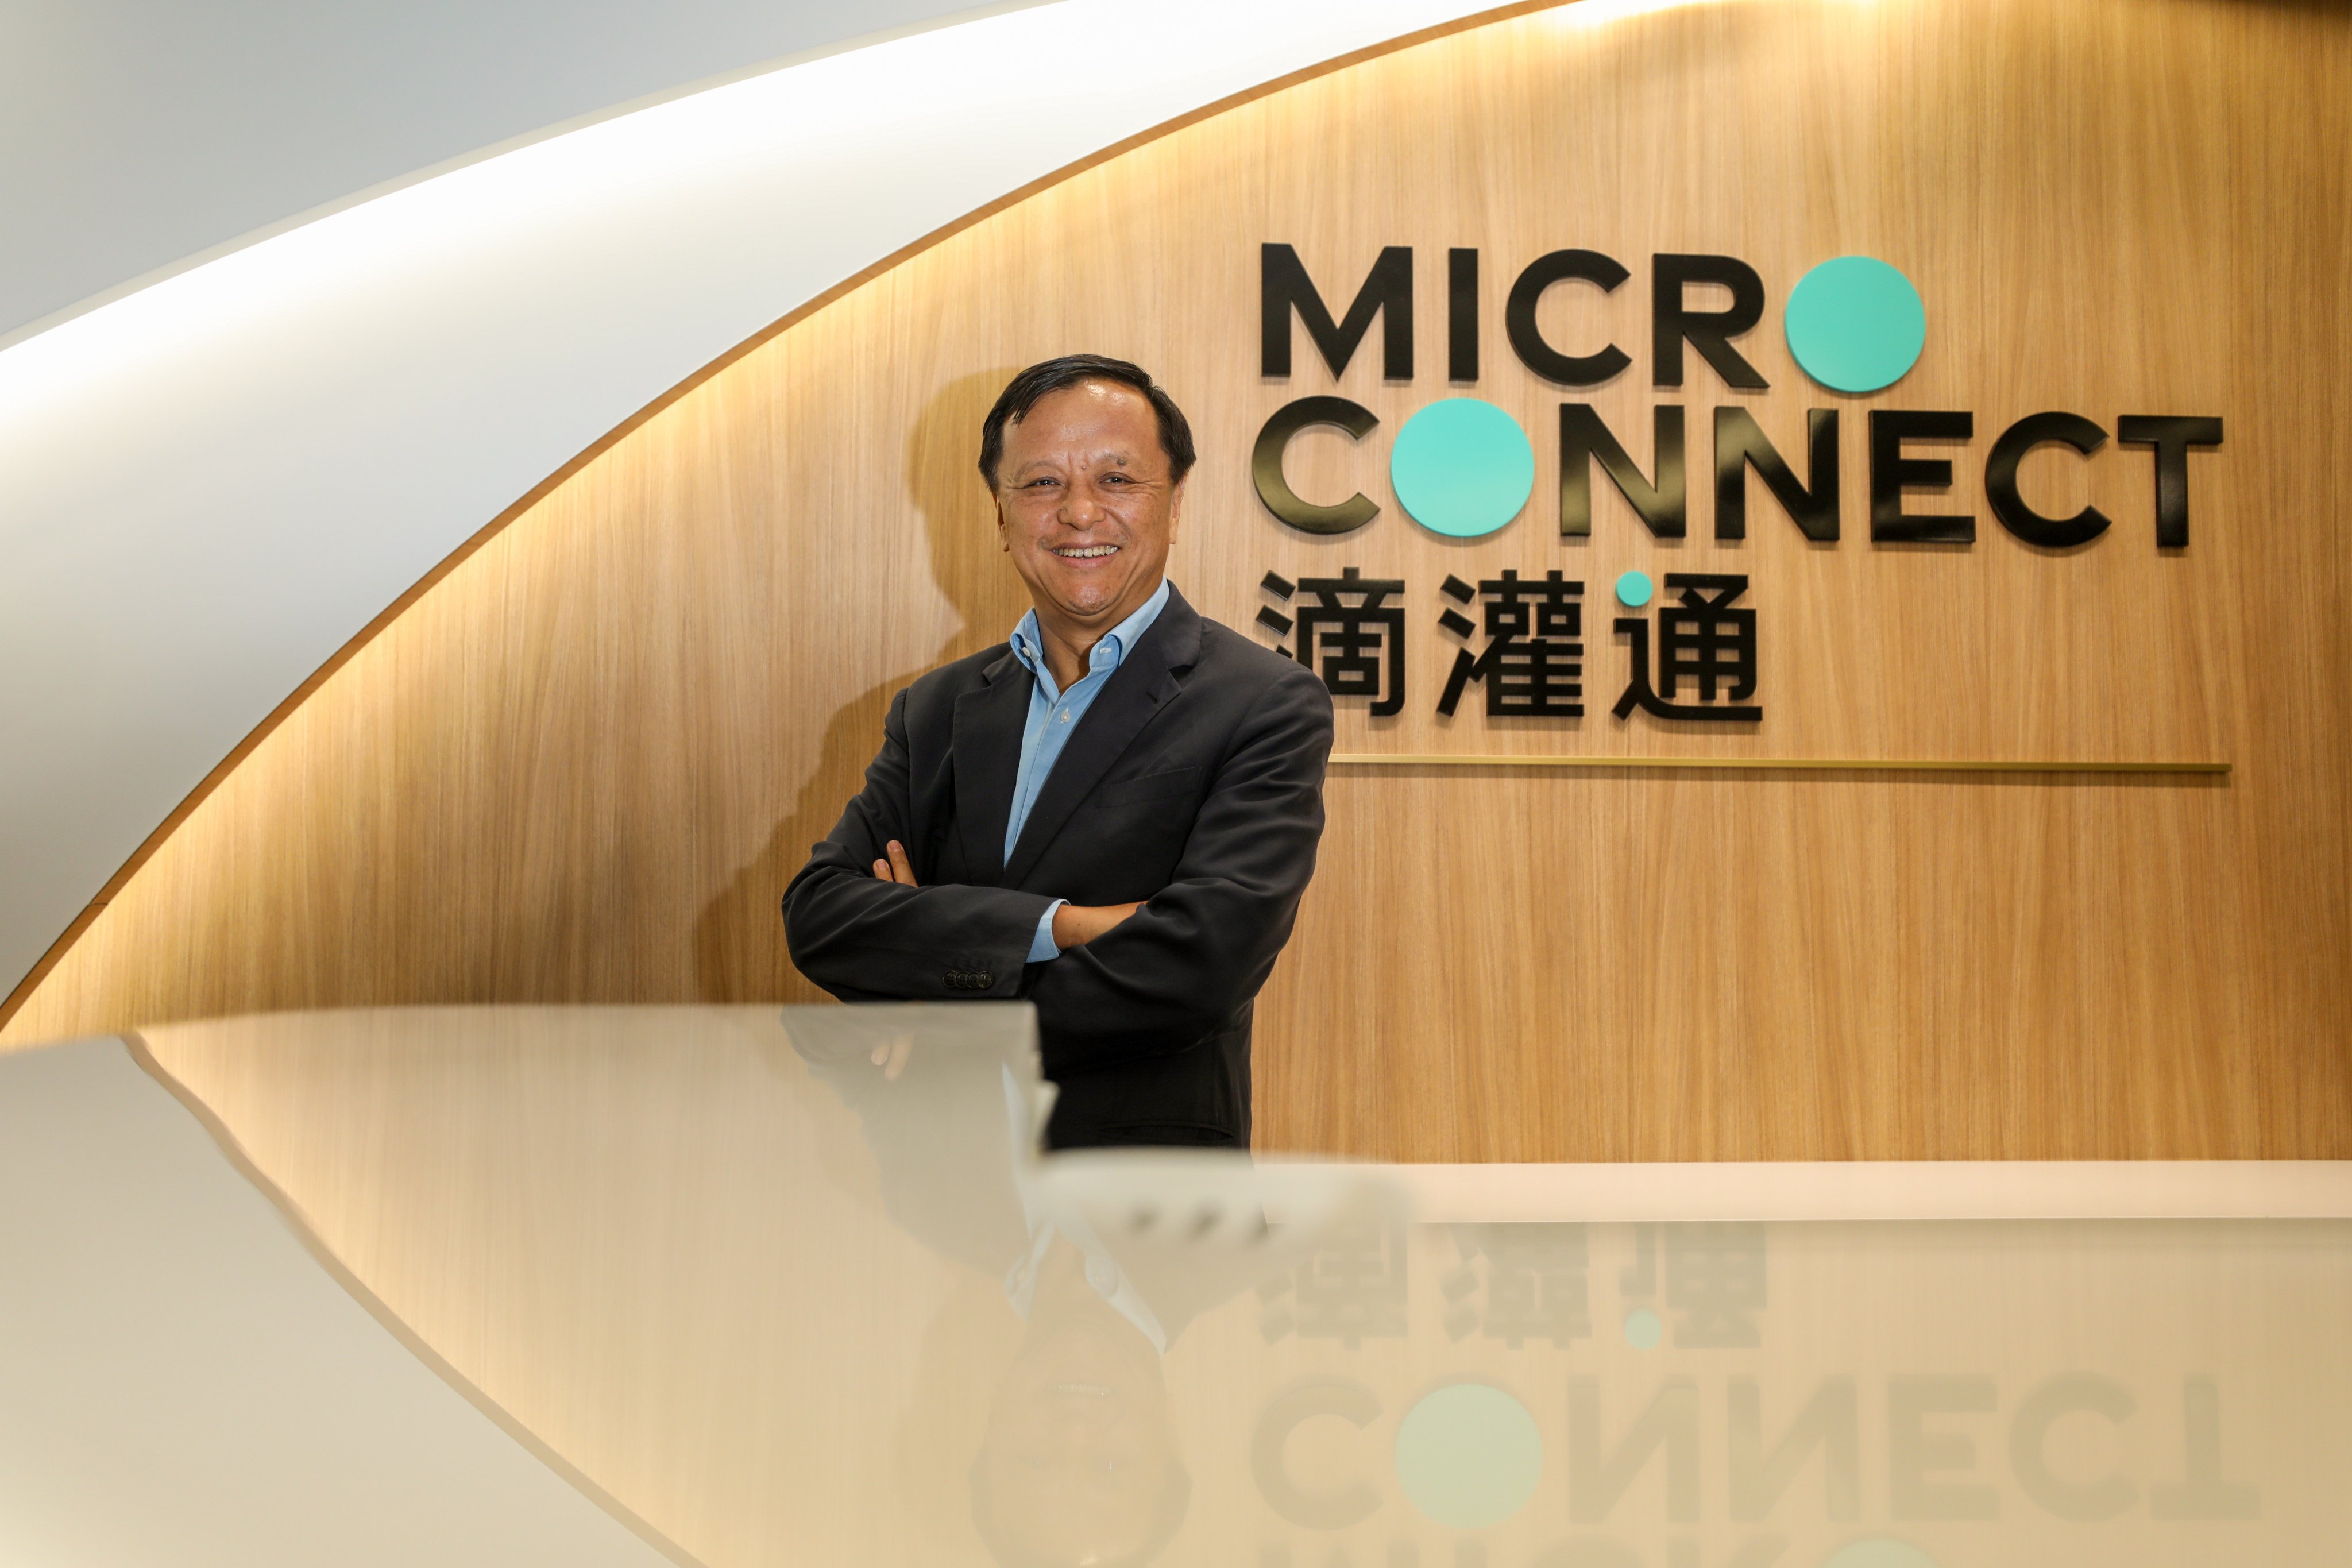 Former Hong Kong Exchanges and Clearing (HKEX) CEO Charles Li Xiaojia, who launched fintech platform Micro Connect in August 2021. Photo: Xiaomei Chen